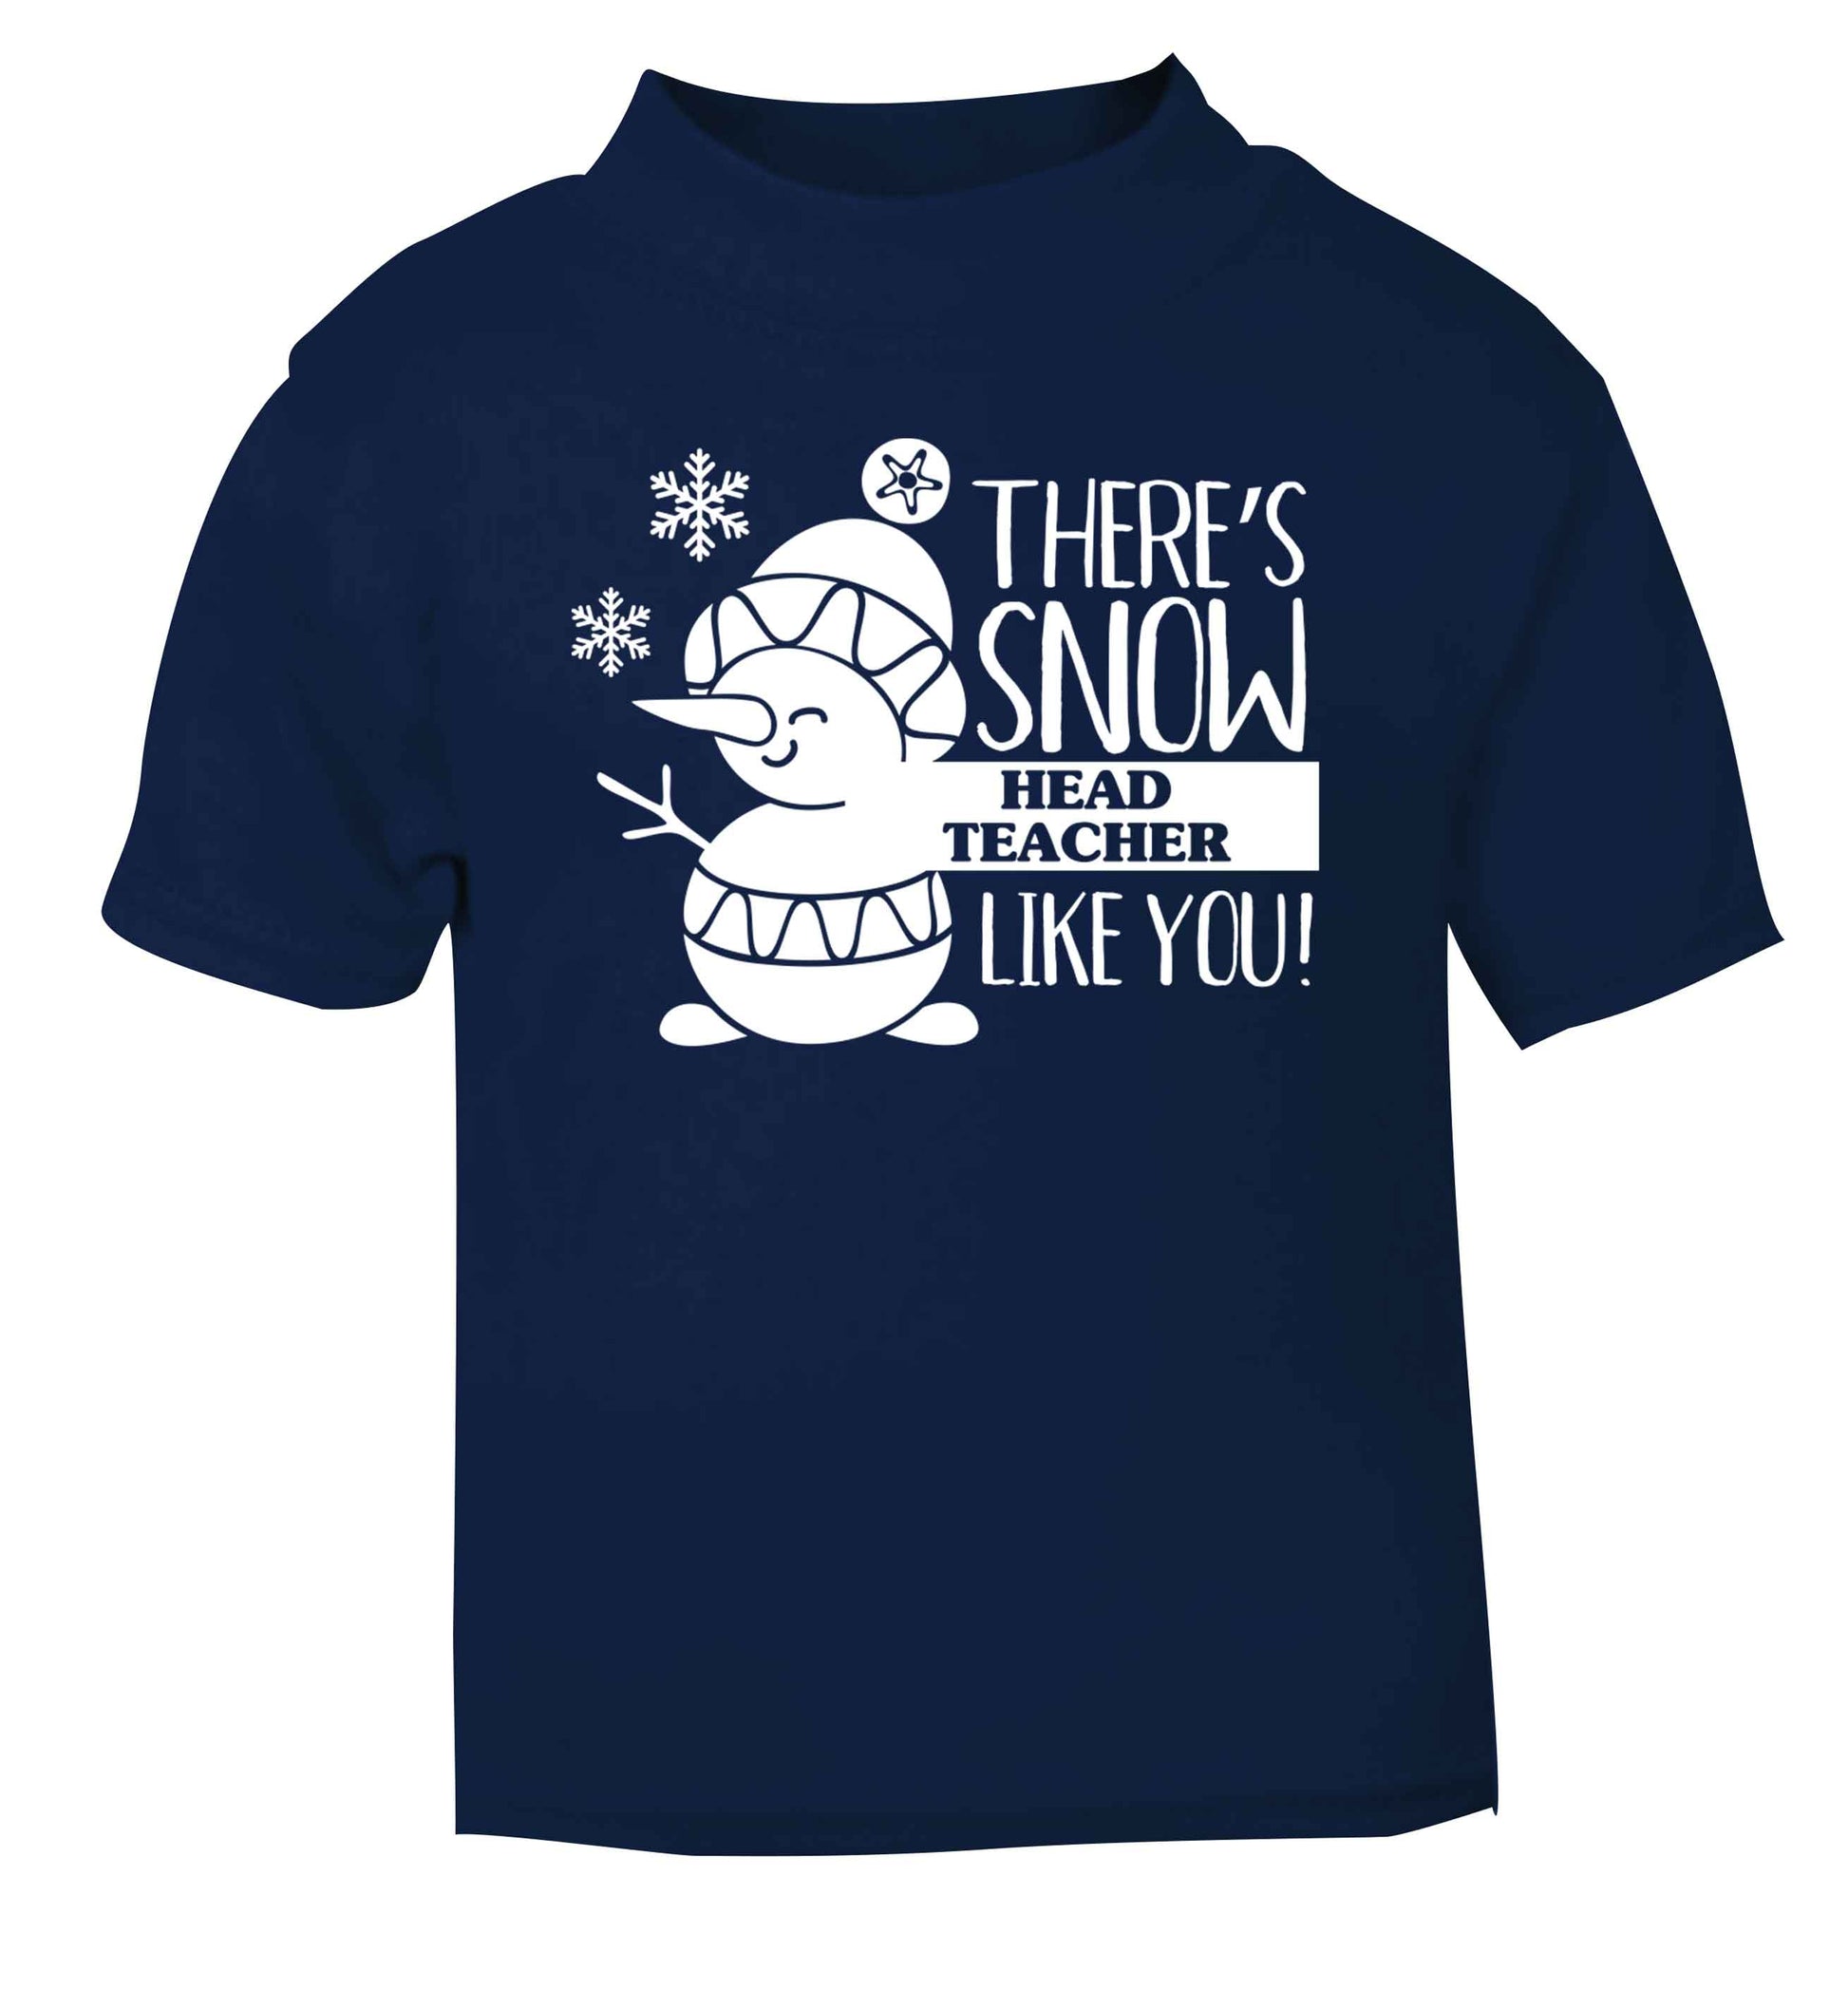 There's snow head teacher like you navy baby toddler Tshirt 2 Years